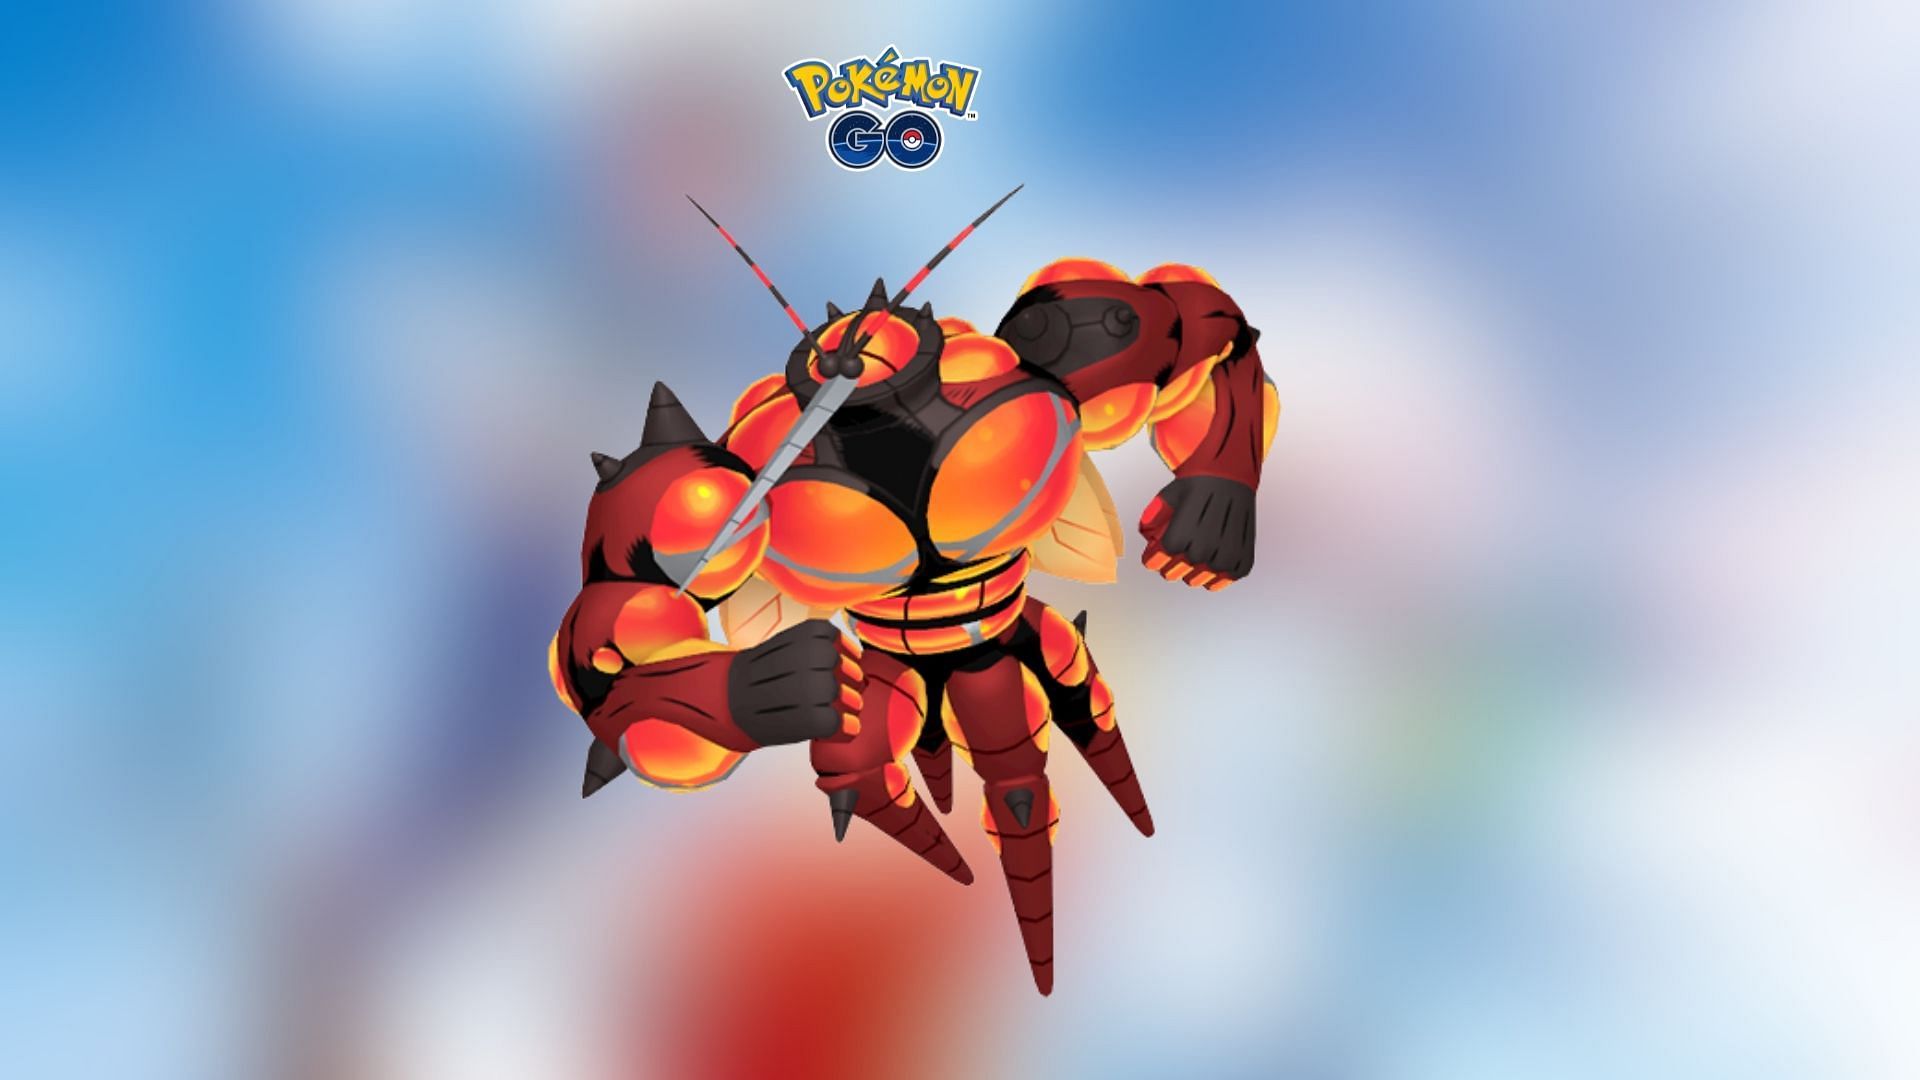 How to get Buzzwole in Pokemon GO and Is Shiny Buzzwole in Pokemon GO?